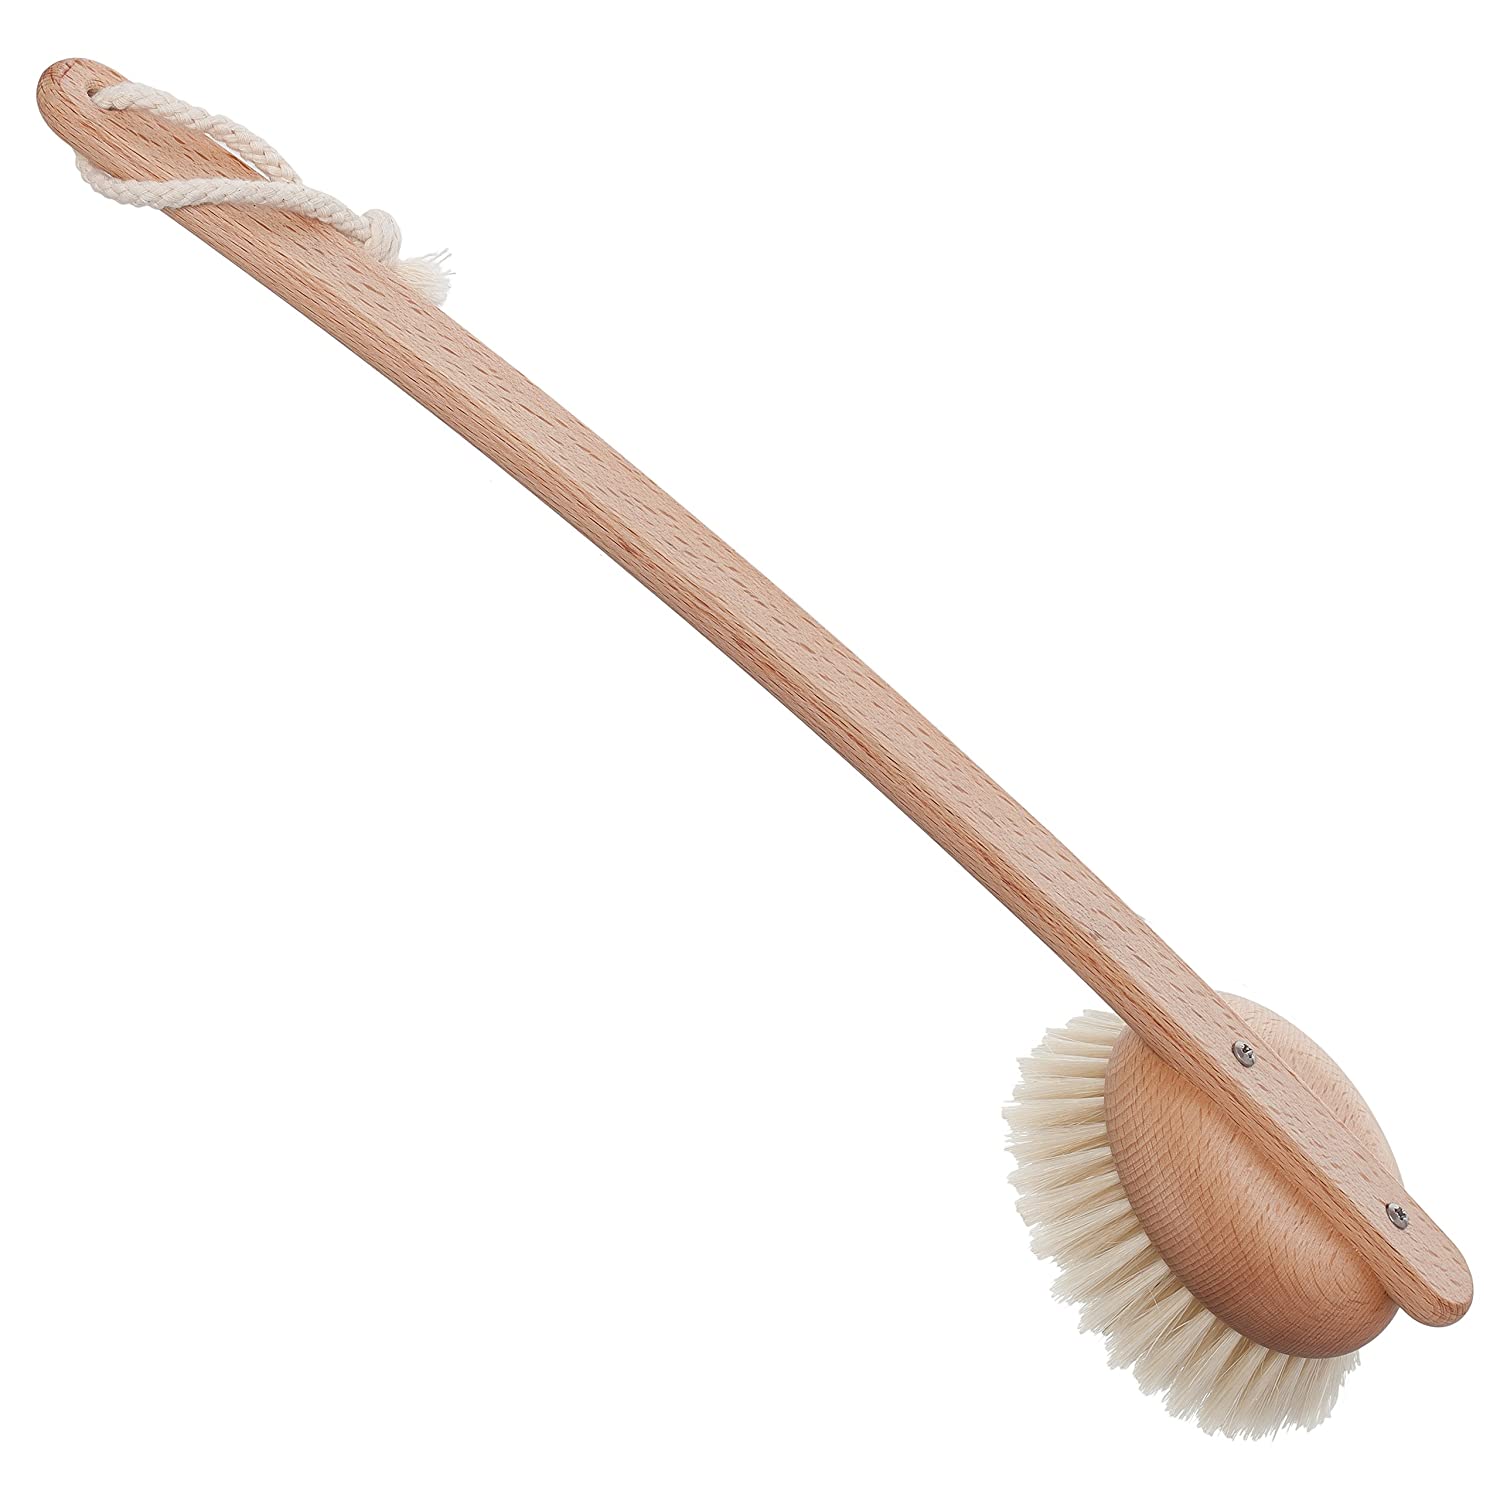 People Will Think You Got These Cleaning Brushes at a Fancy General Store